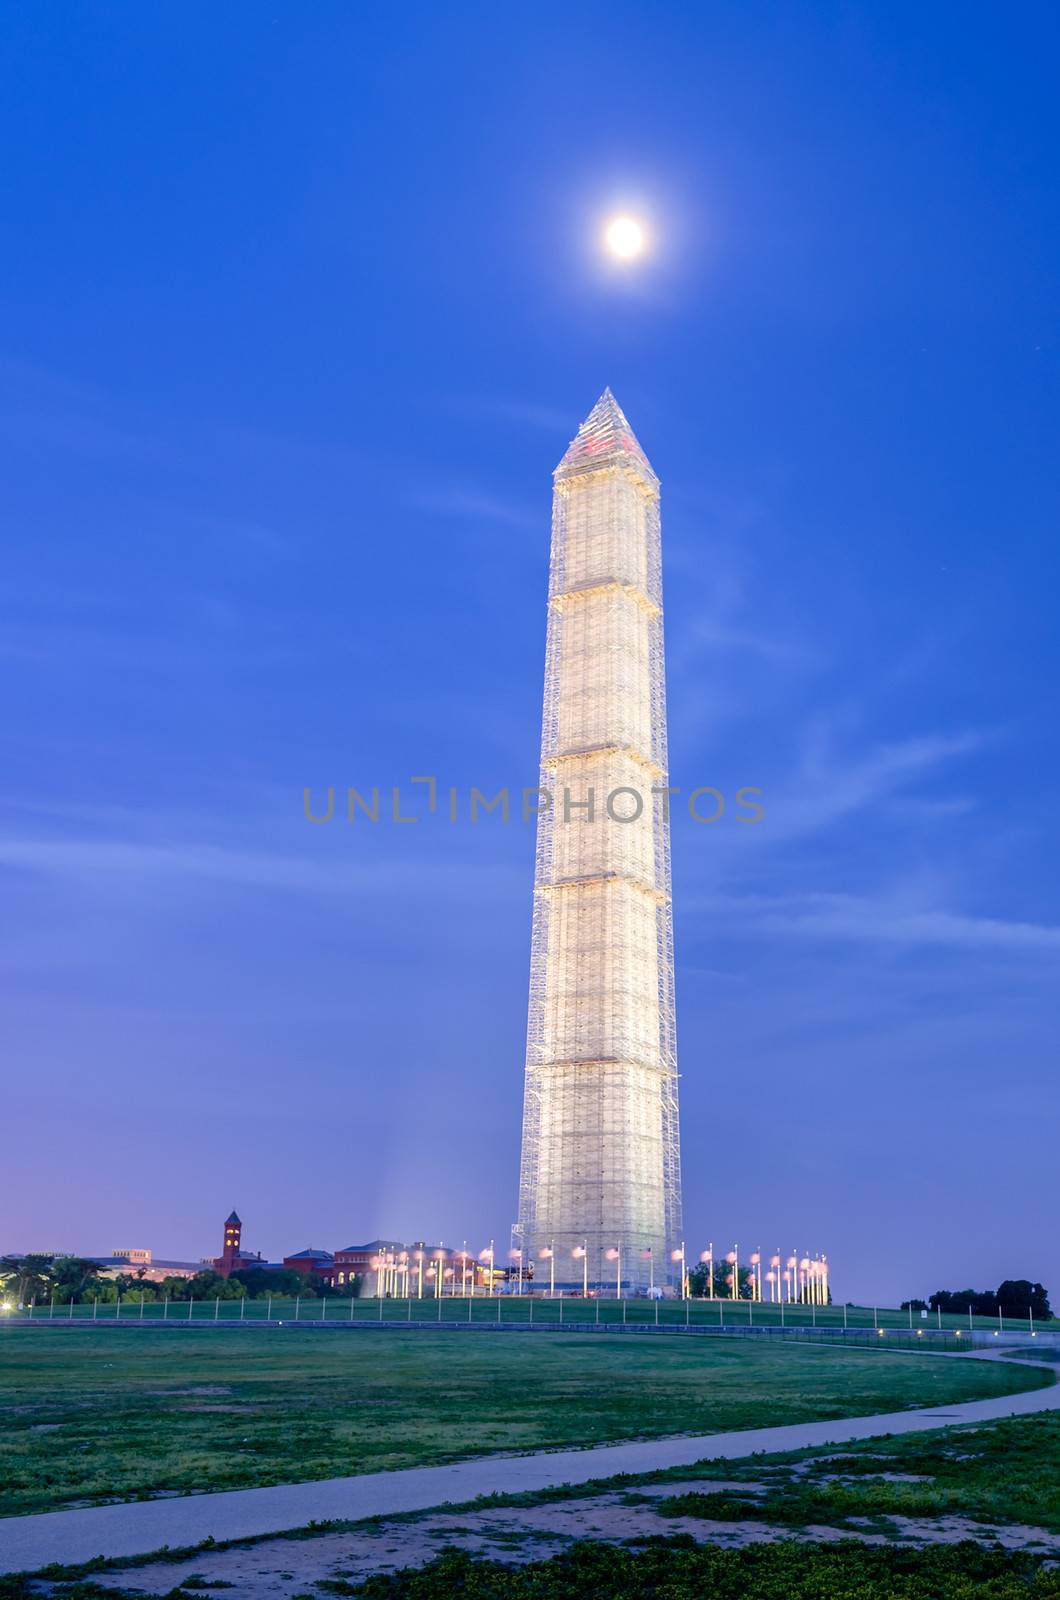 The Washington Memorial in Washington DC at Night against a scenic blue sky